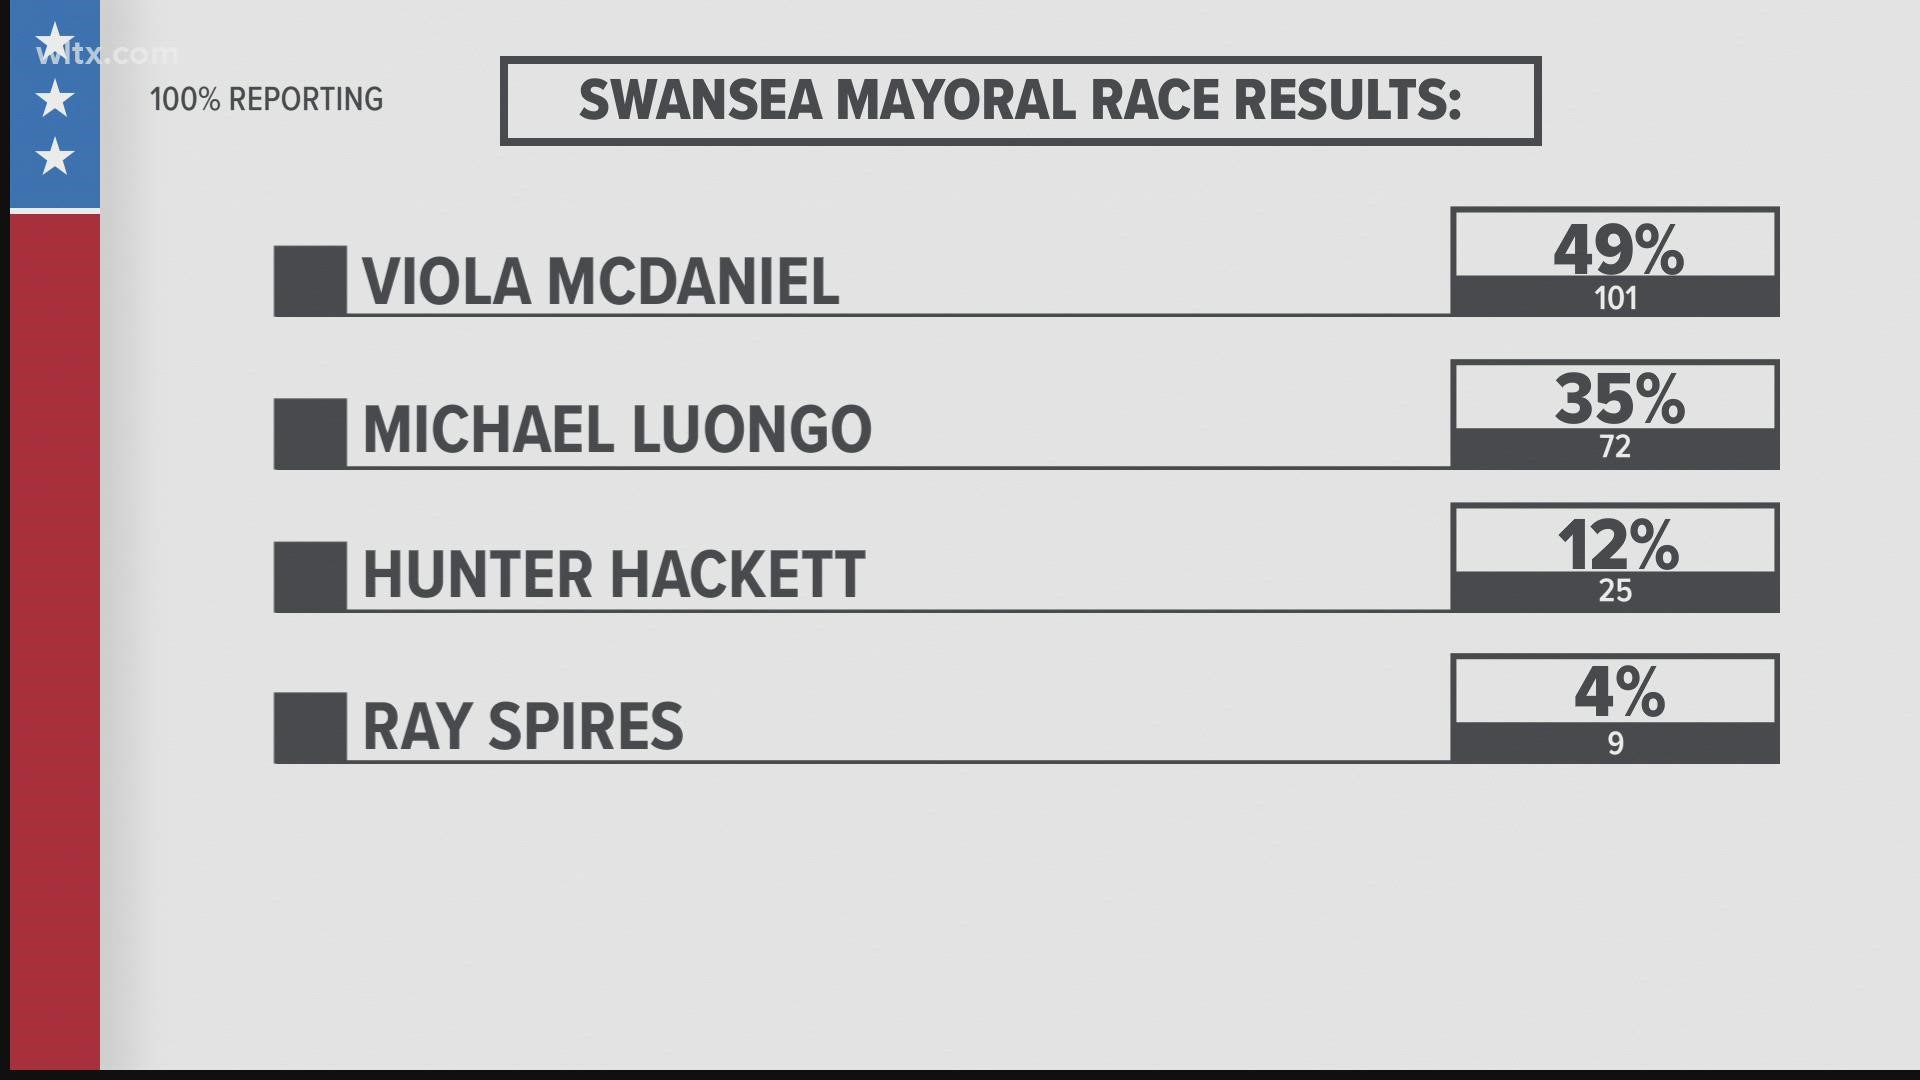 For the Swansea mayor's race it's unclear if a winner will be announced or it will require a runoff.